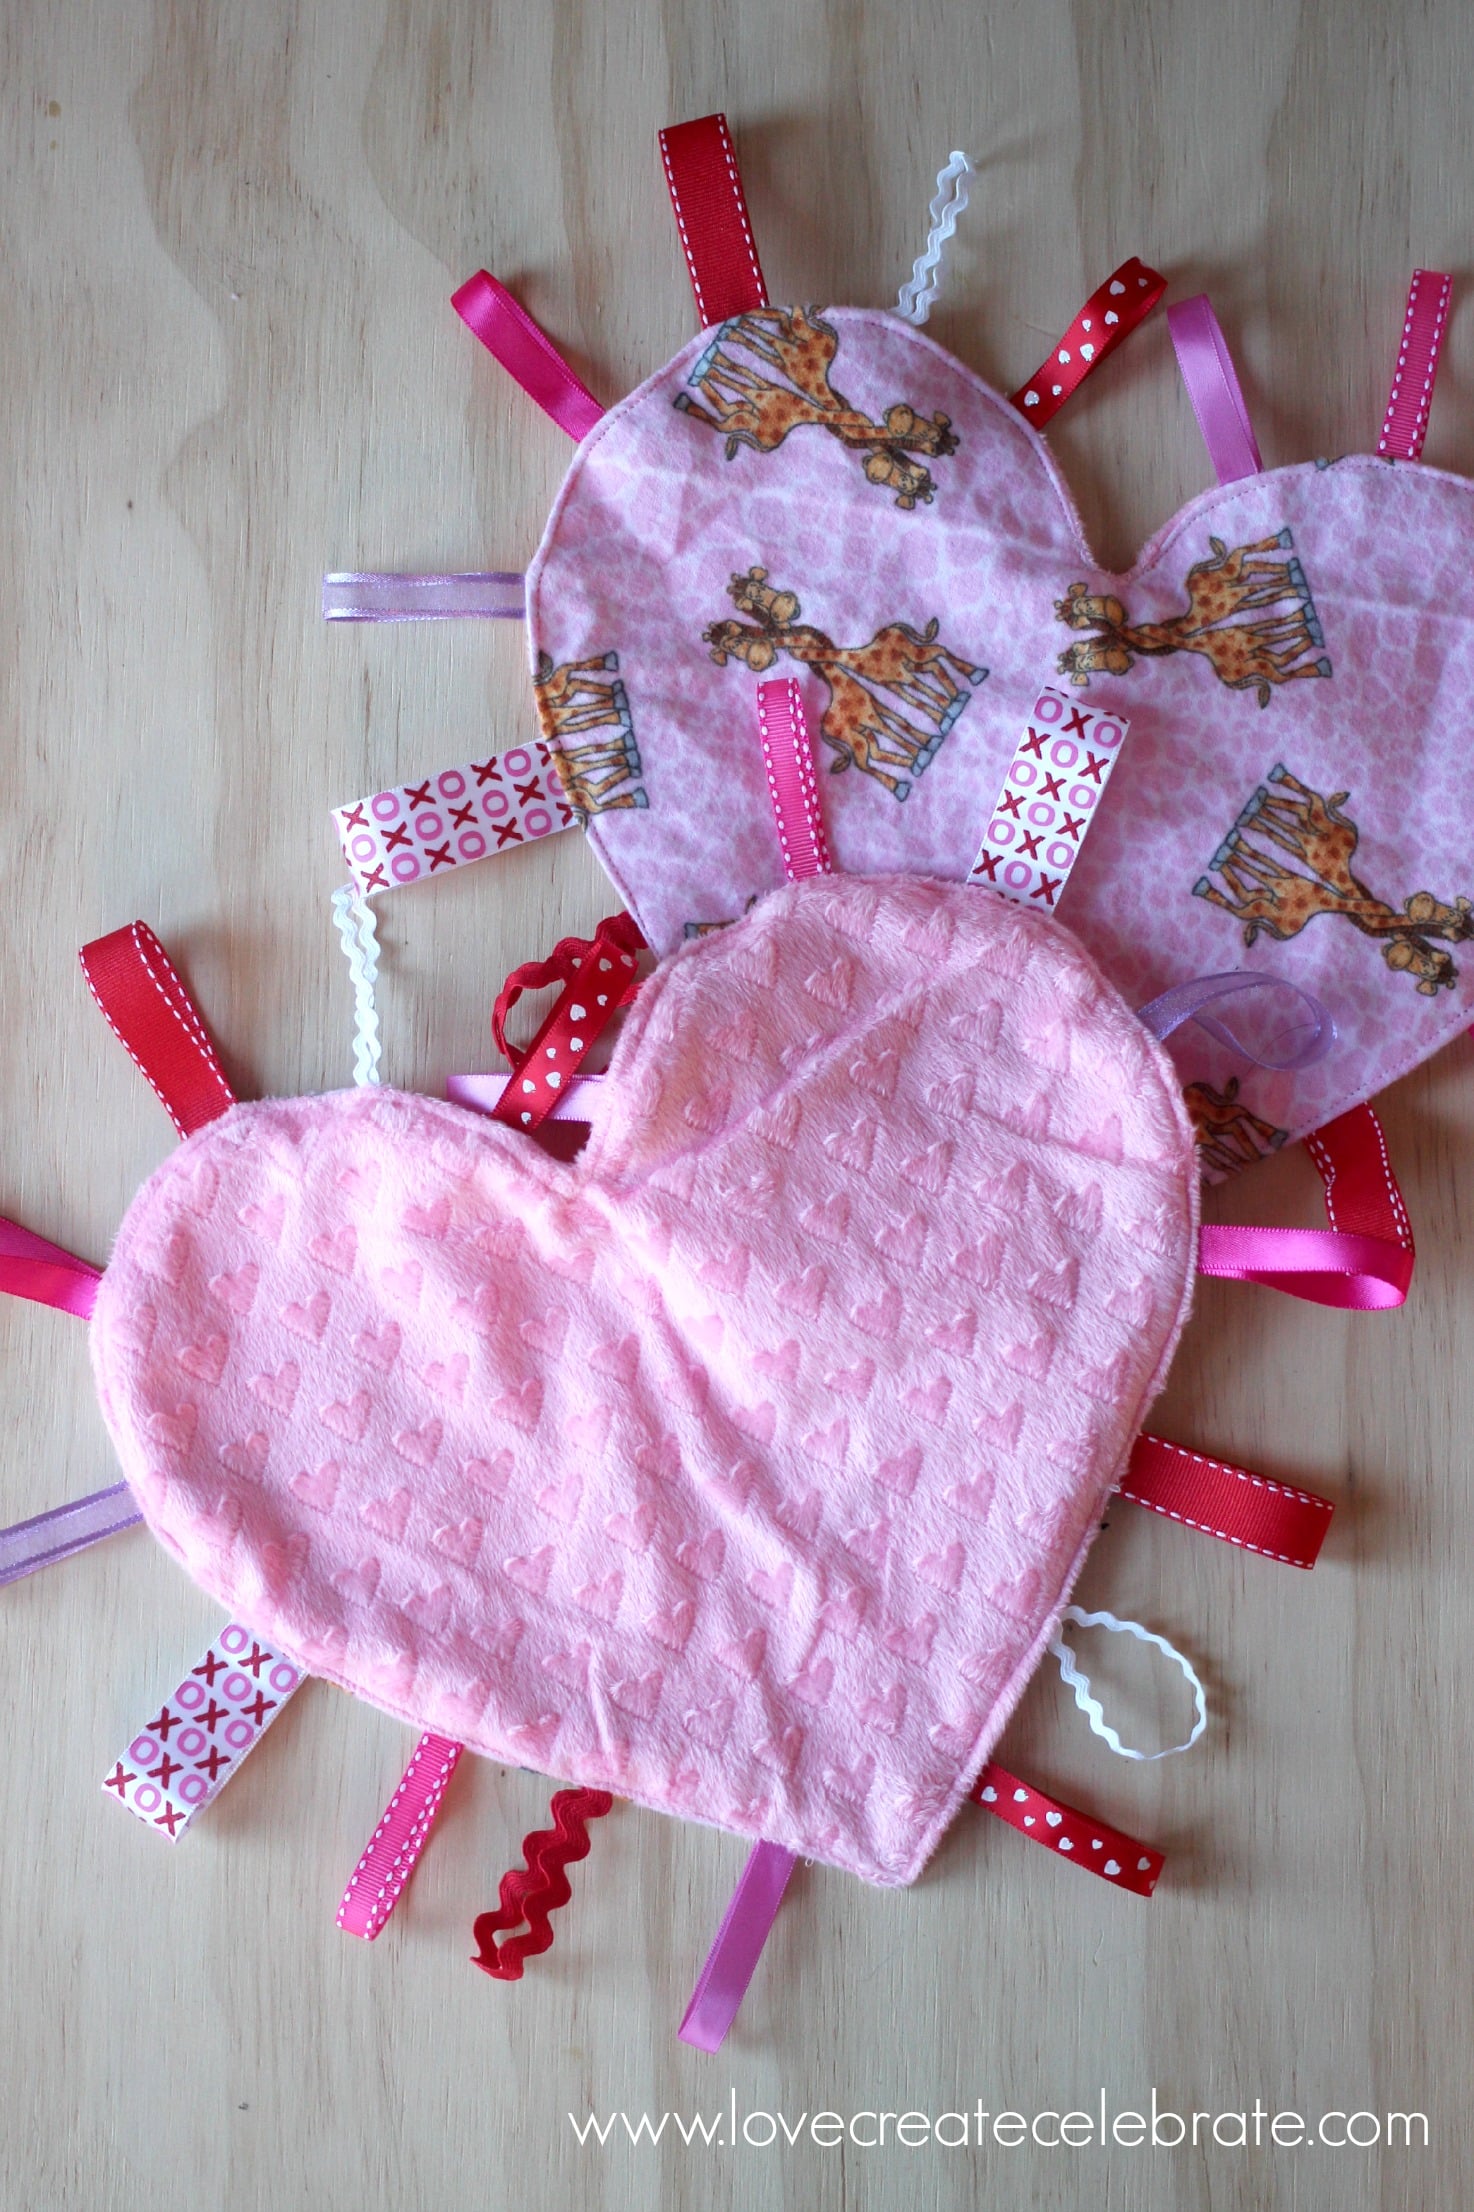 These heart taggie blankets are so soft!